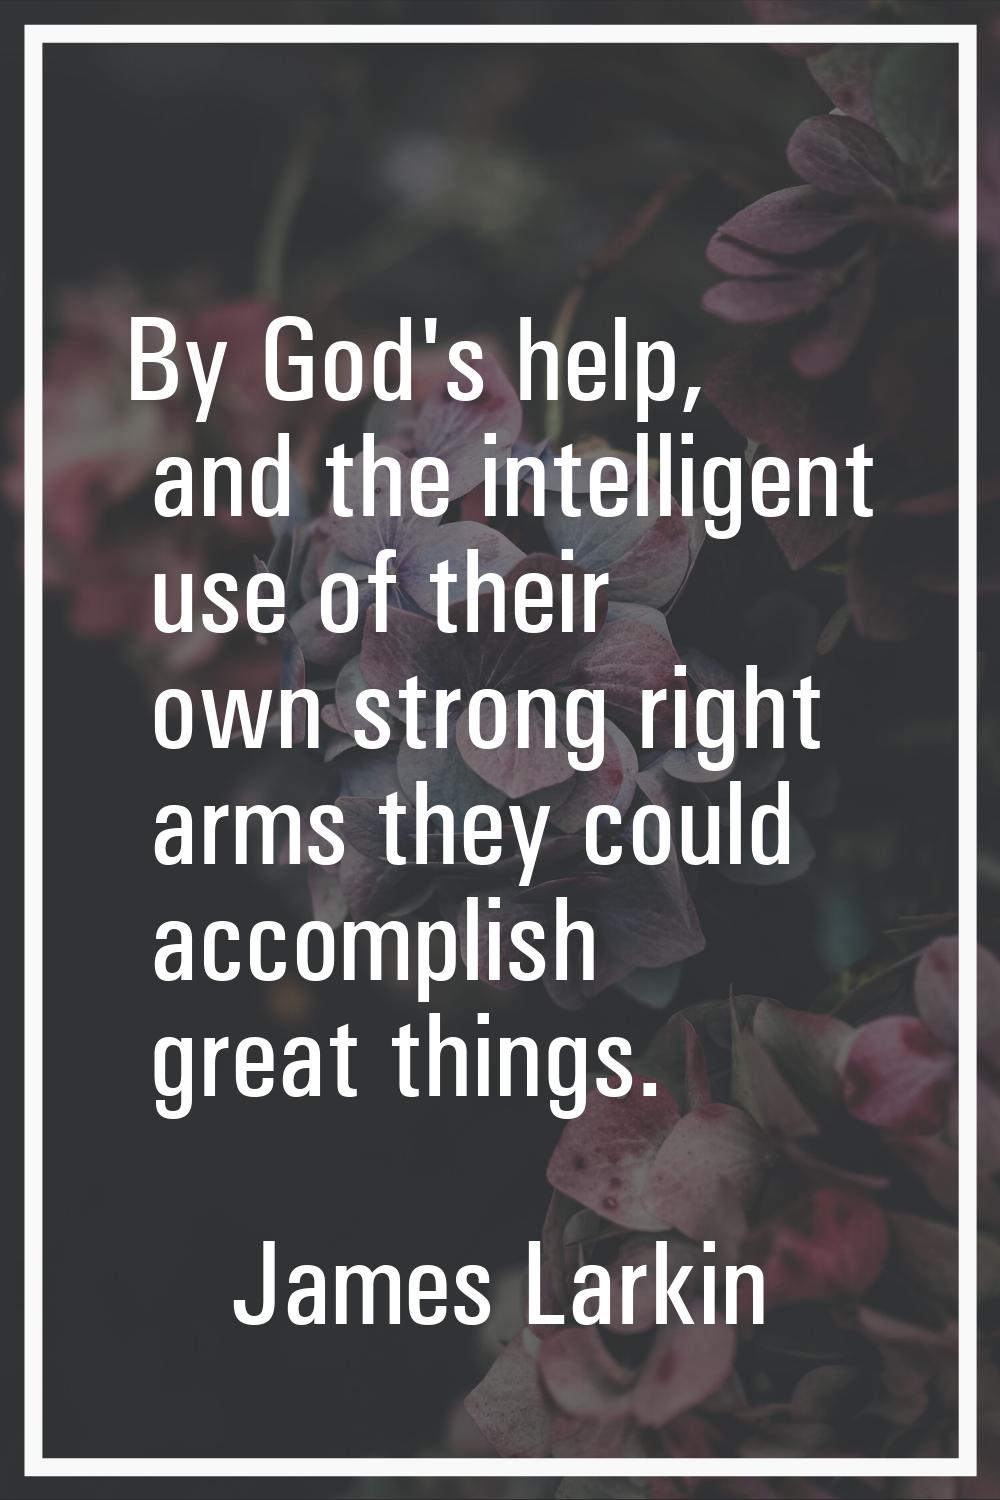 By God's help, and the intelligent use of their own strong right arms they could accomplish great t